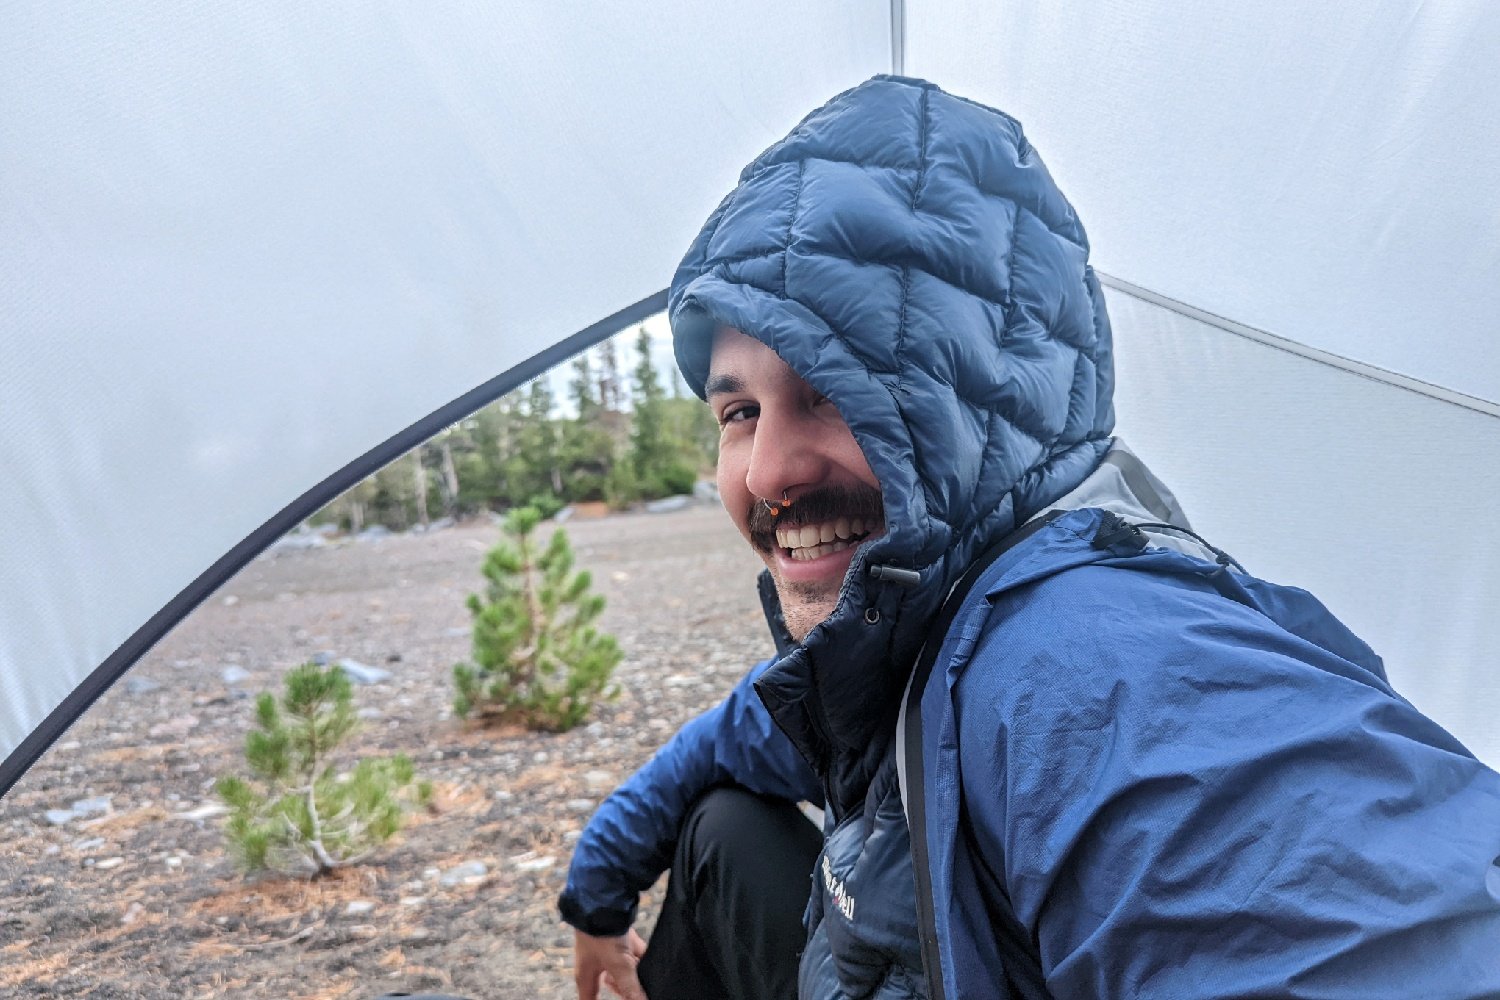 A hiker in a tent wearing the Enlightened Equipment Visp rain jacket over a puffy coat